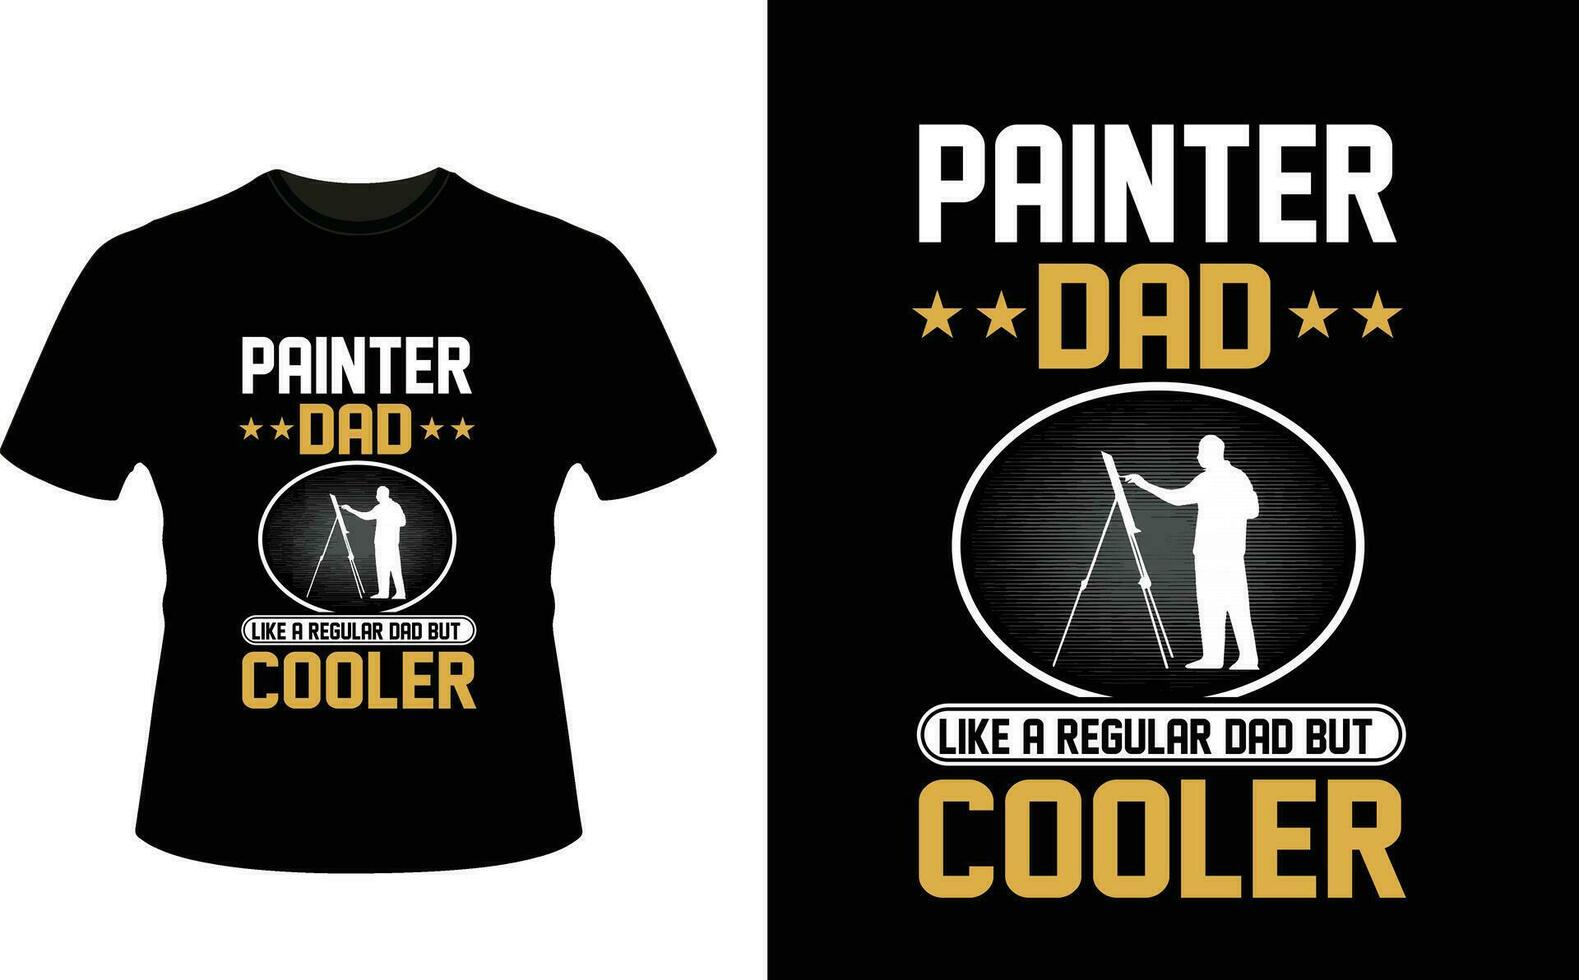 Painter Dad Like a Regular Dad But Cooler or dad papa tshirt design or Father day t shirt Design vector